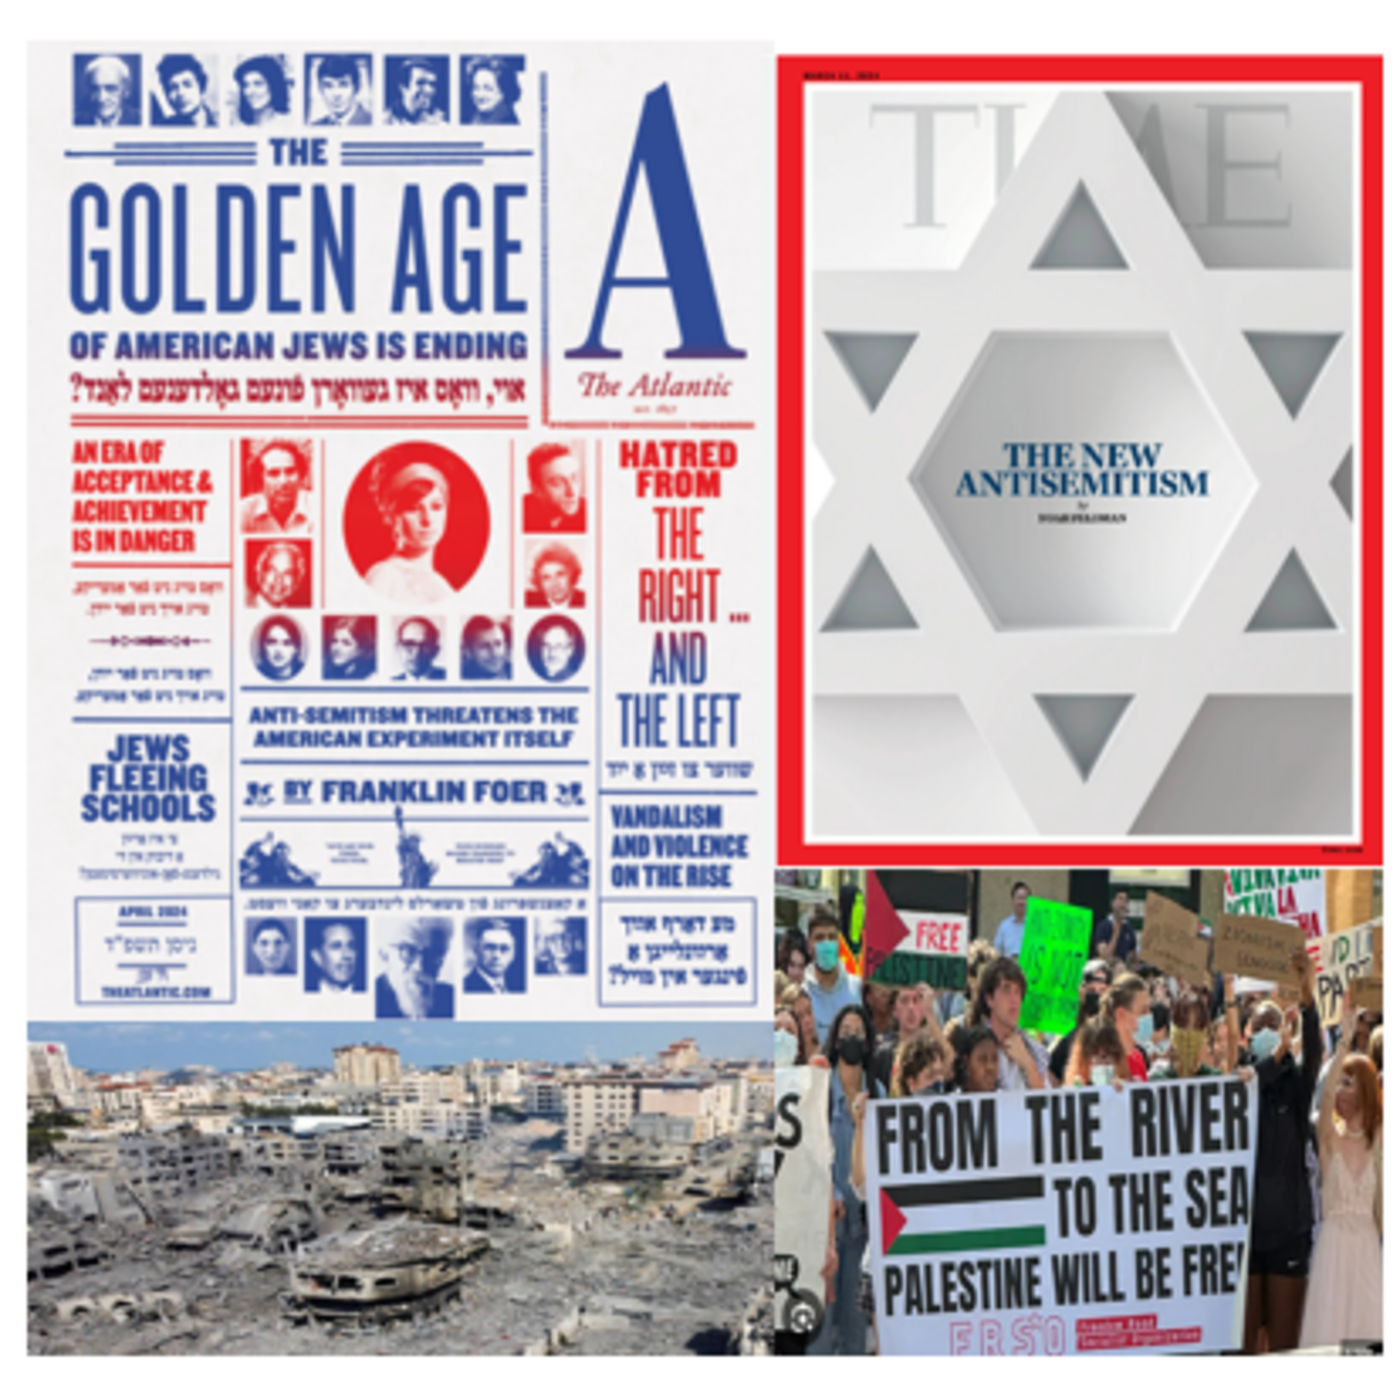 Episode 450: E. Michael Jones on the New Antisemitism and the End of the Jewish Golden Age